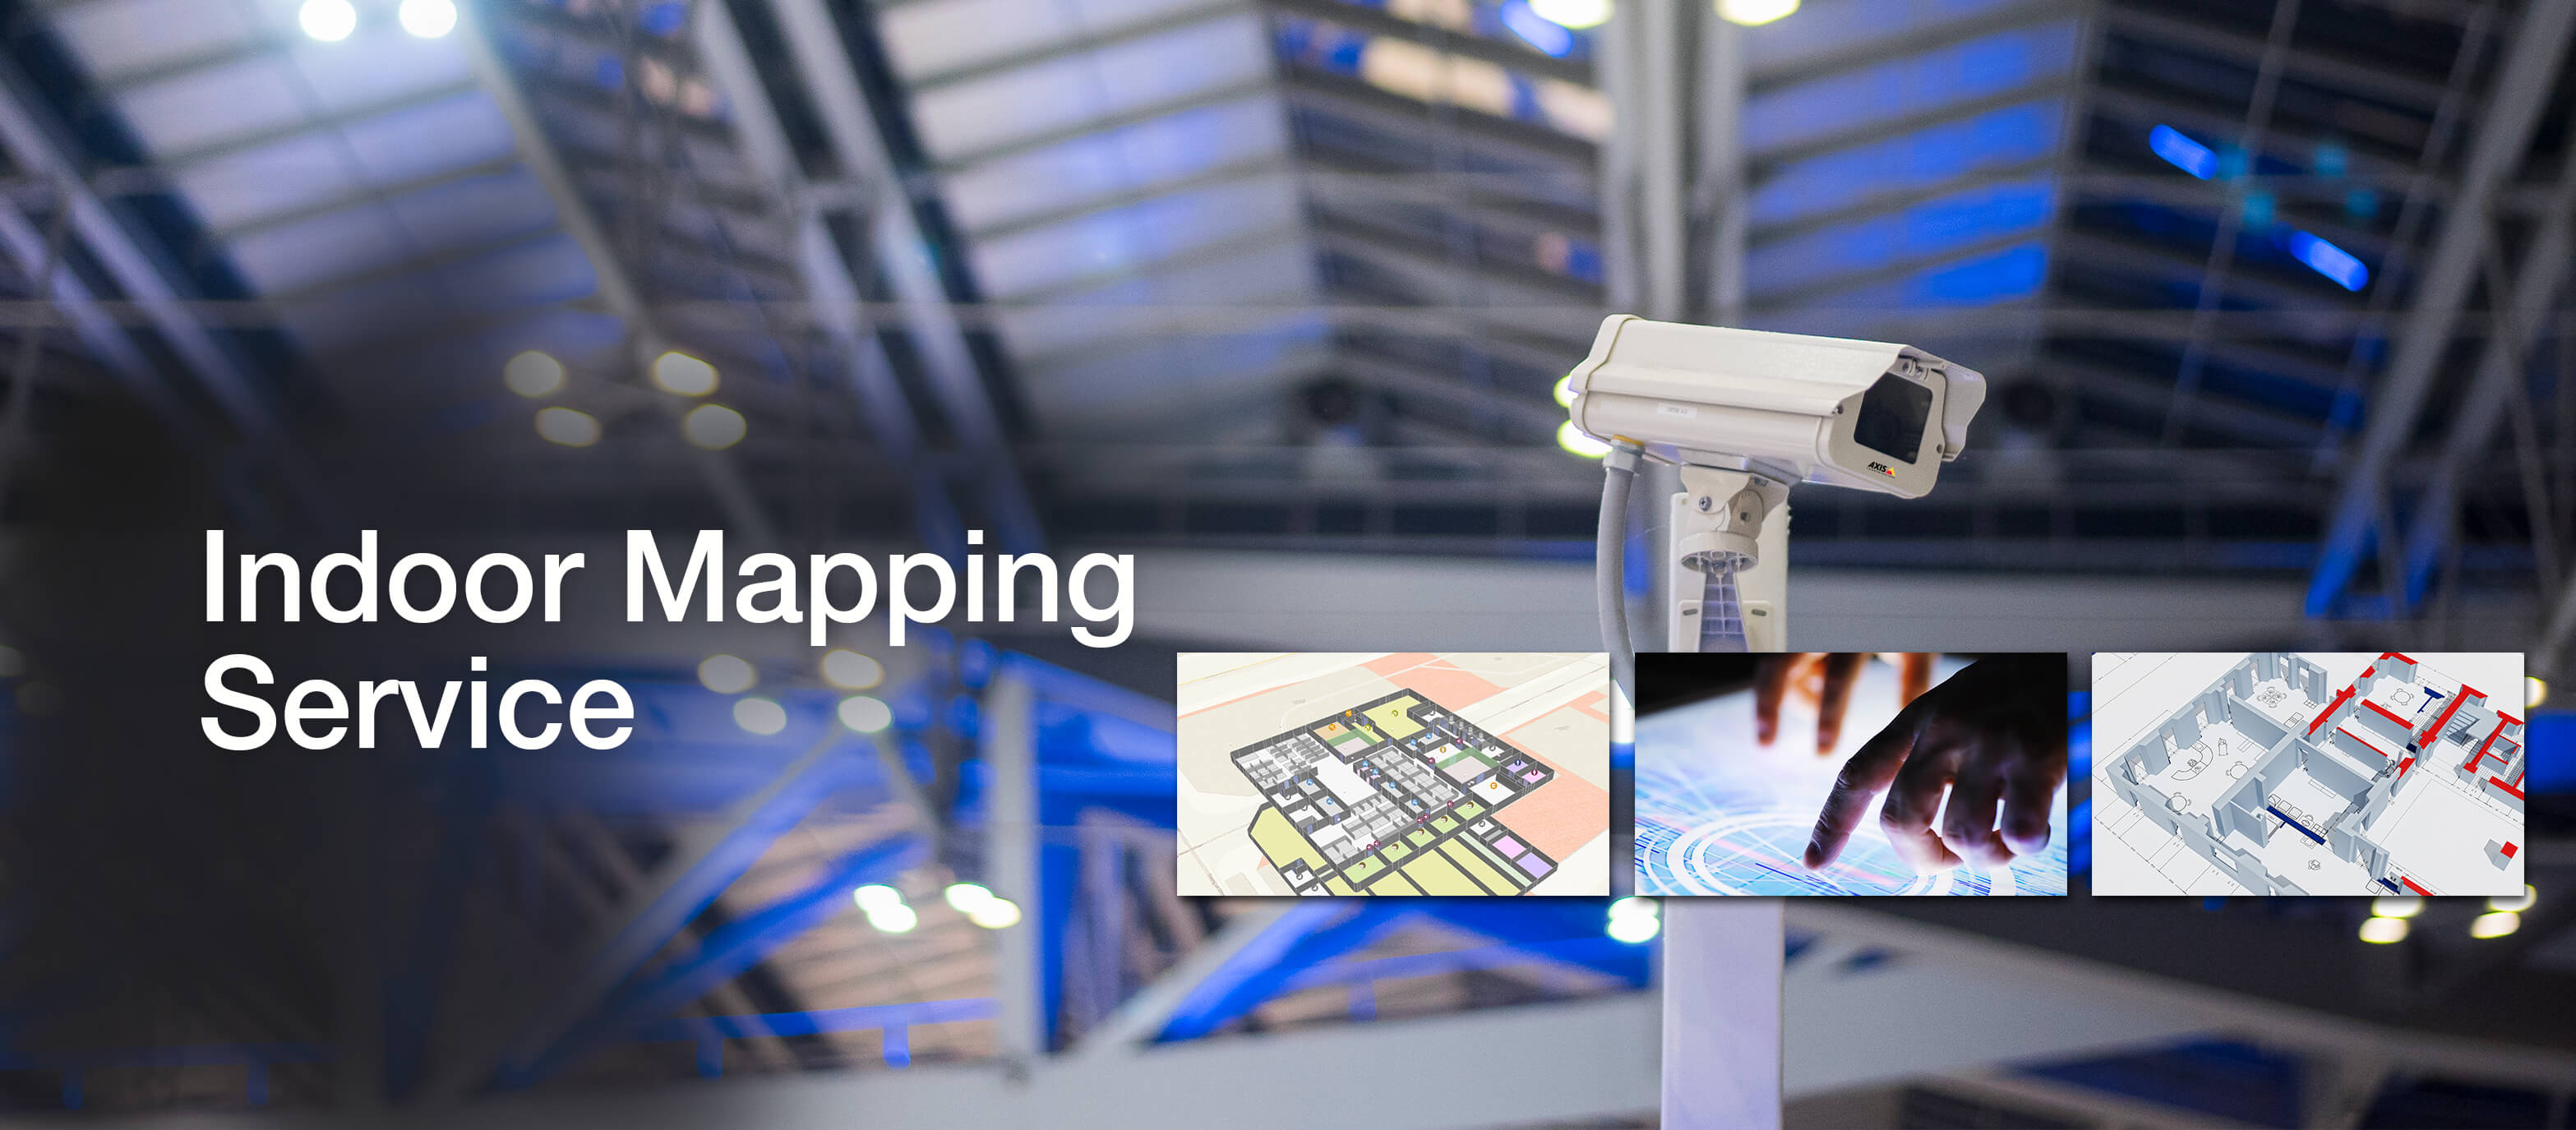 Indoor Mapping Service